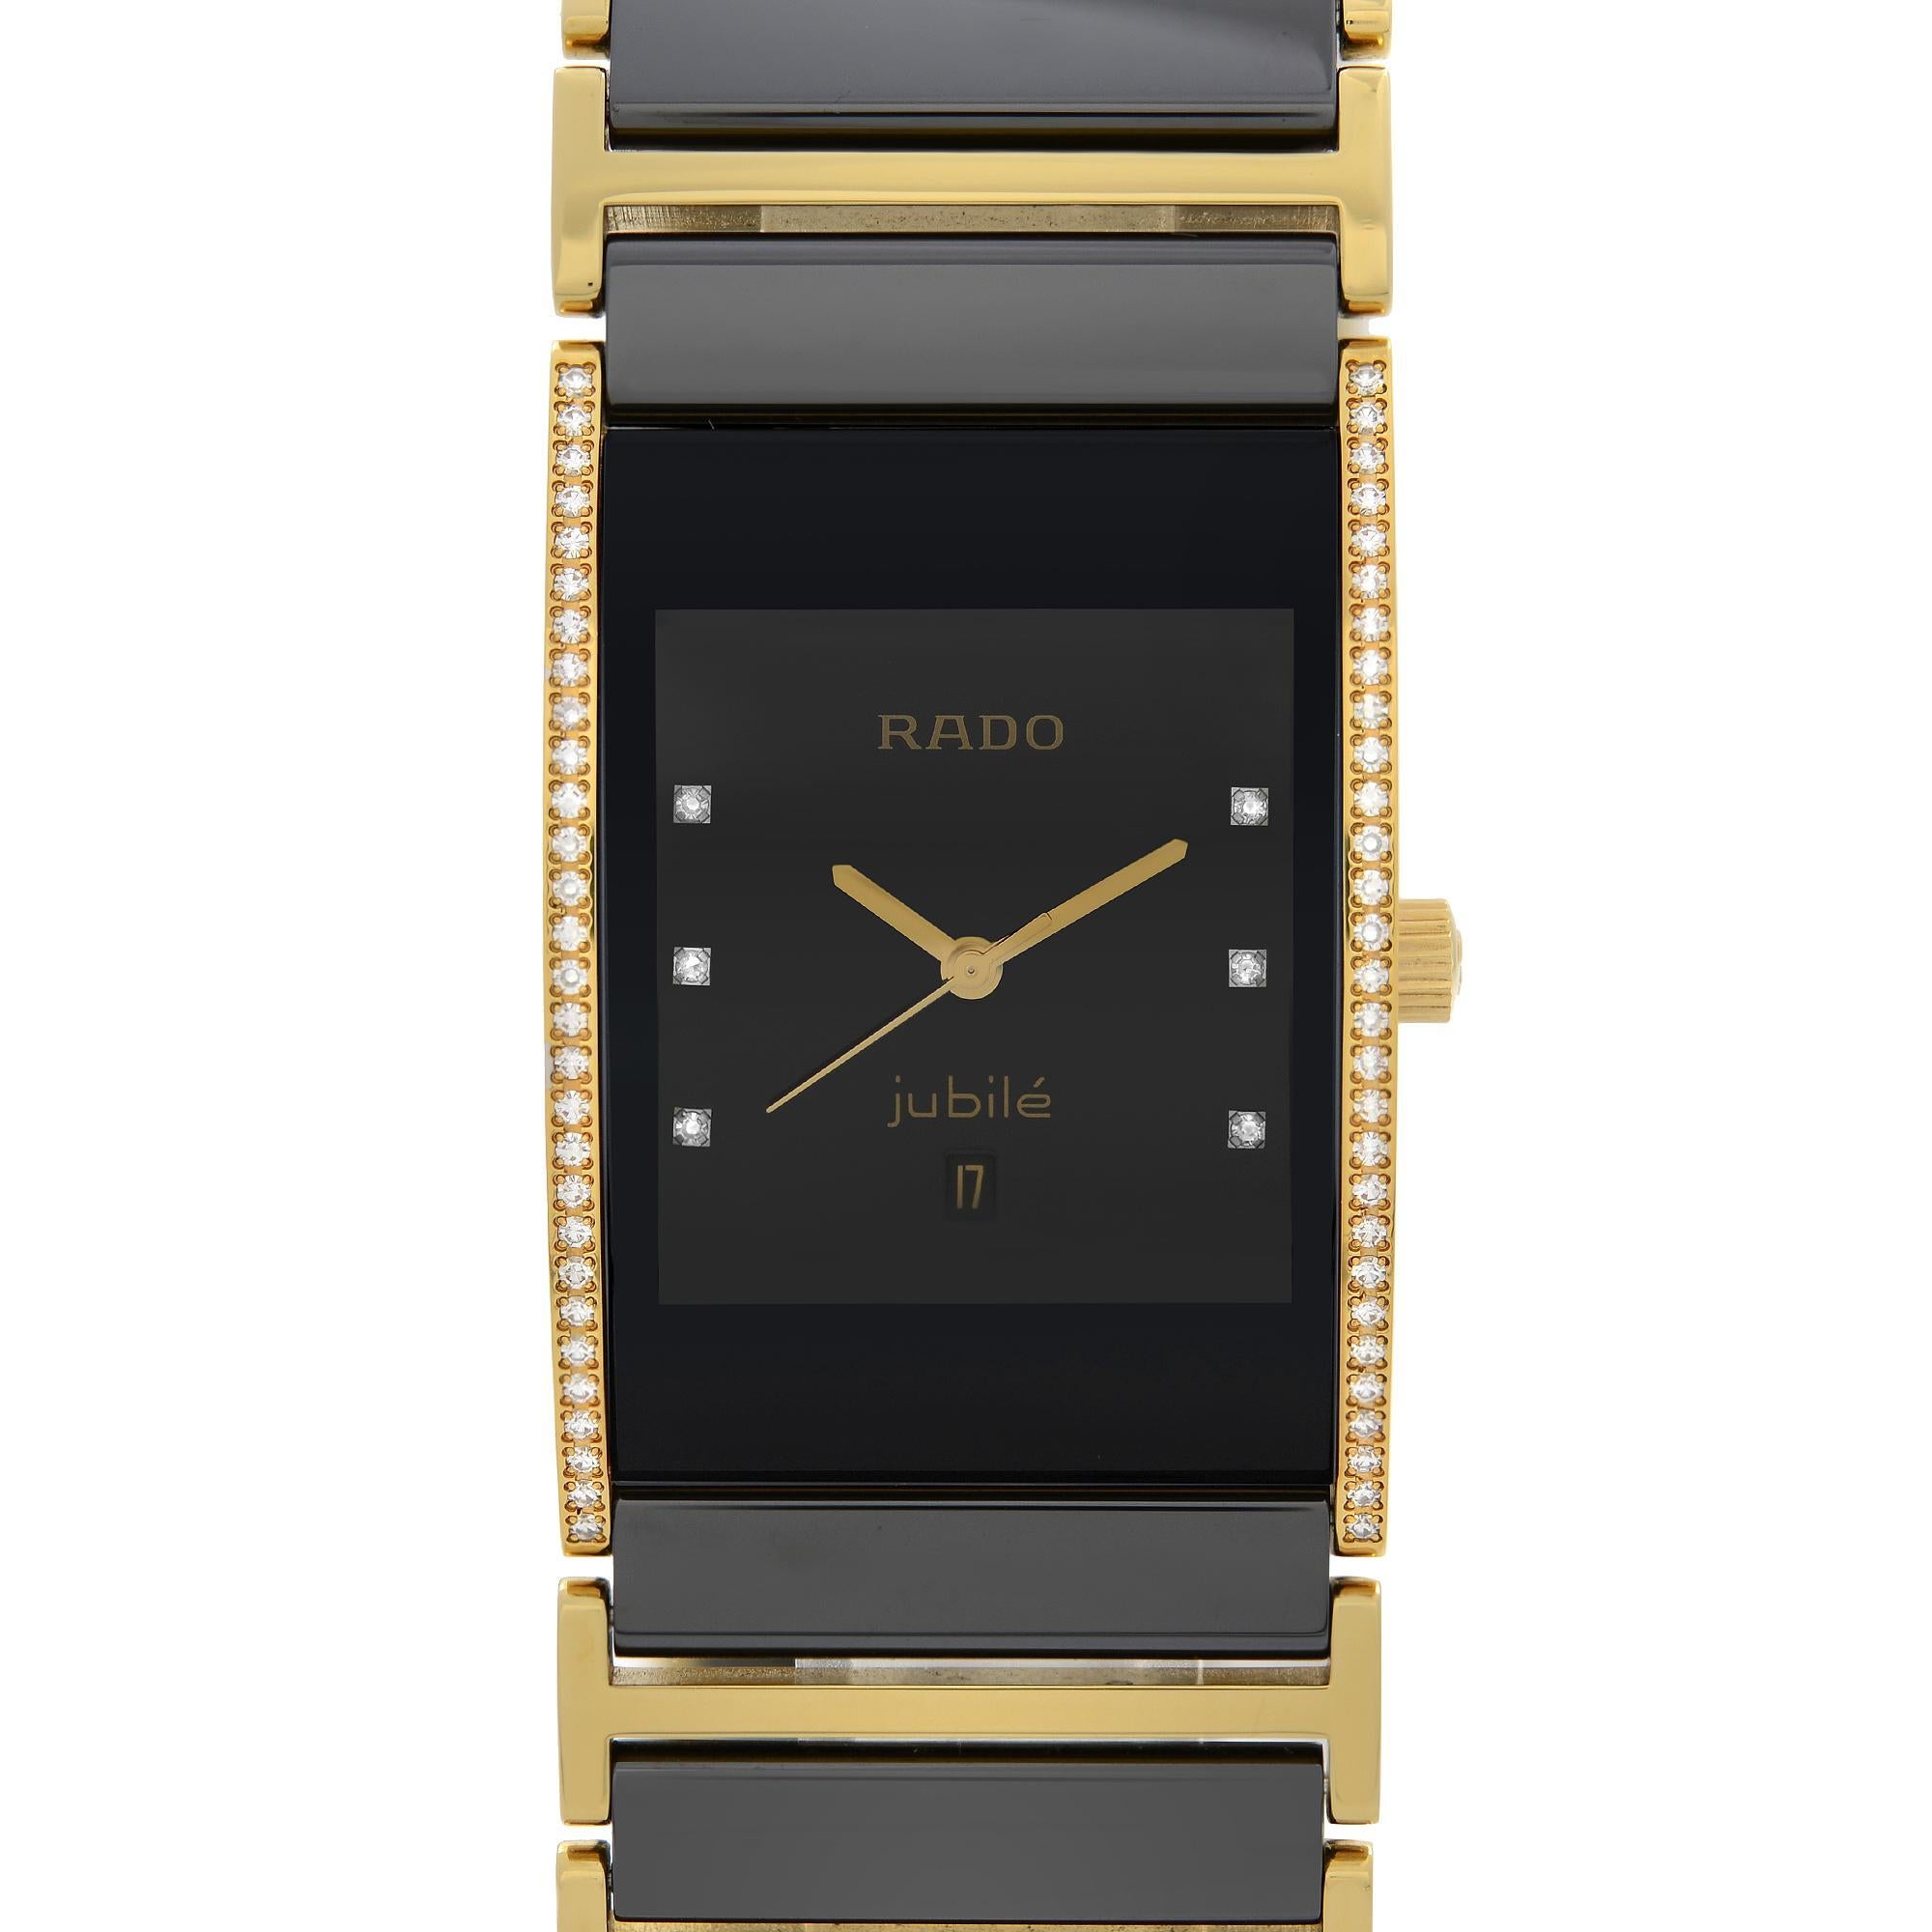 New with Defects Rado Integral Jubile Quartz Unisex Watch R20751752. The Watch has Hairline Scratches on the Case Due to Storing. This Beautiful Ladies Timepiece Is Powered by a Quartz (Battery) Movement and Features: Gold-Tone and Black Ceramic